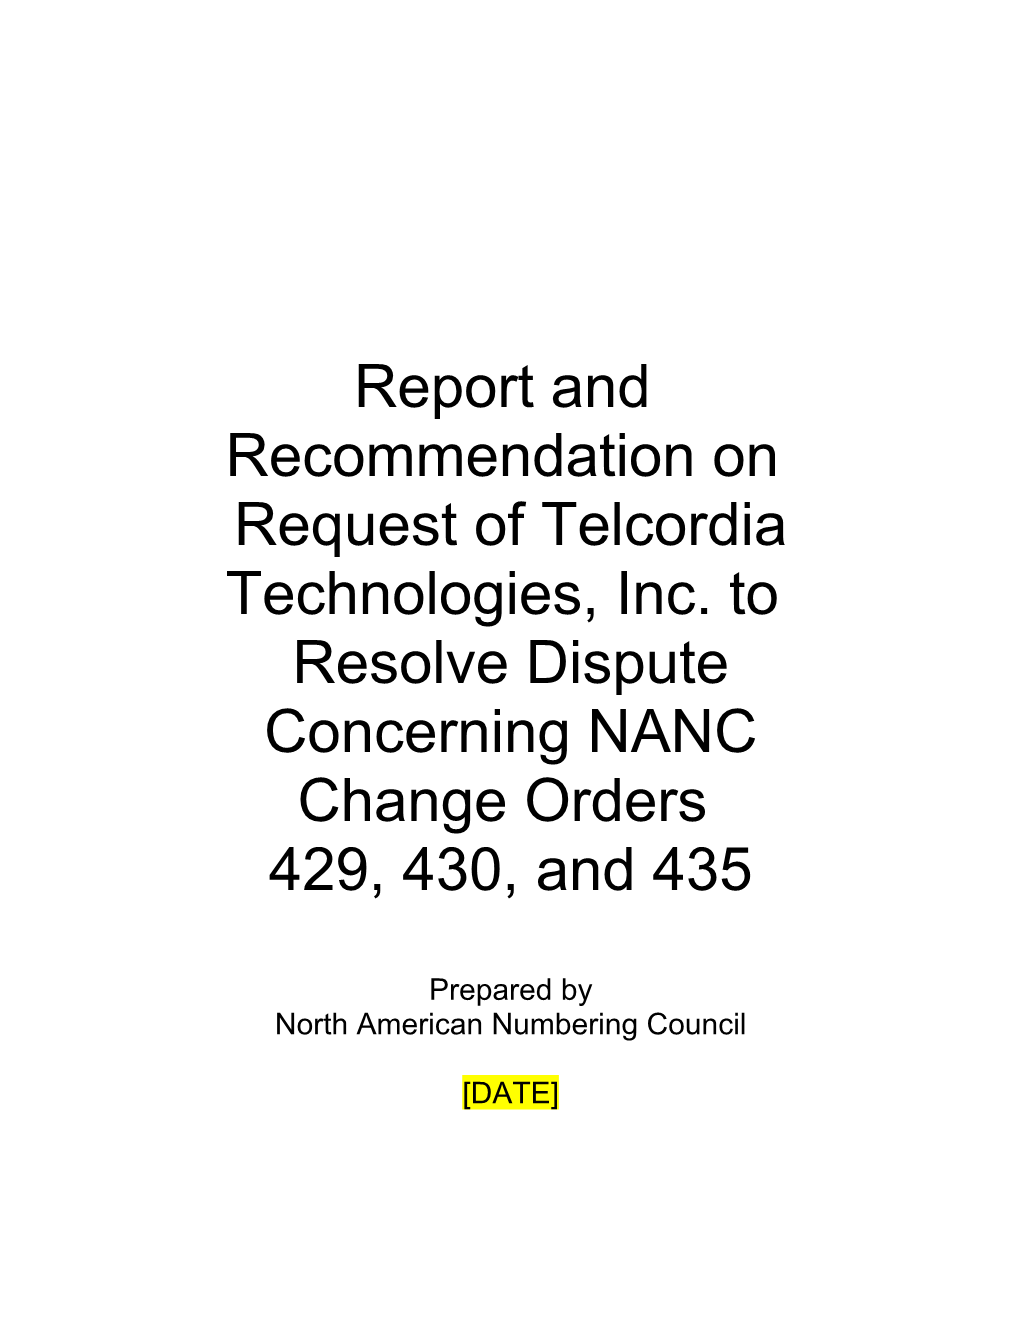 Report and Recommendation on Telcordia Dispute